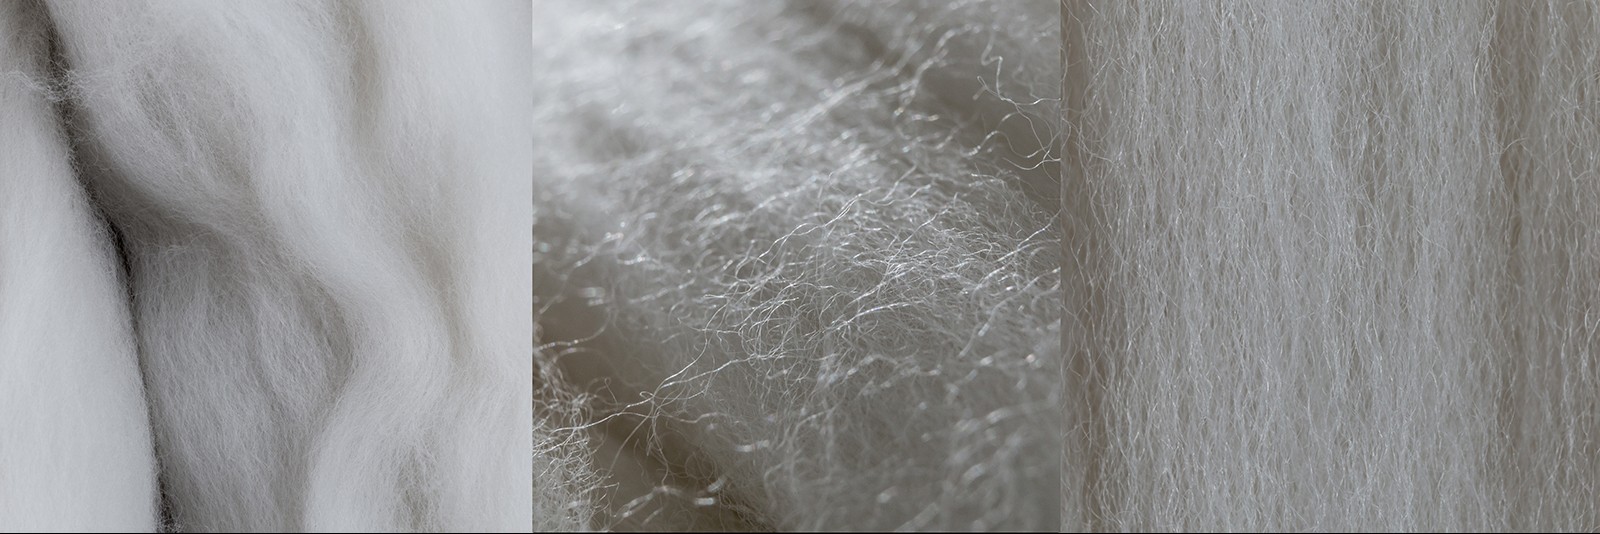 Combed Wool